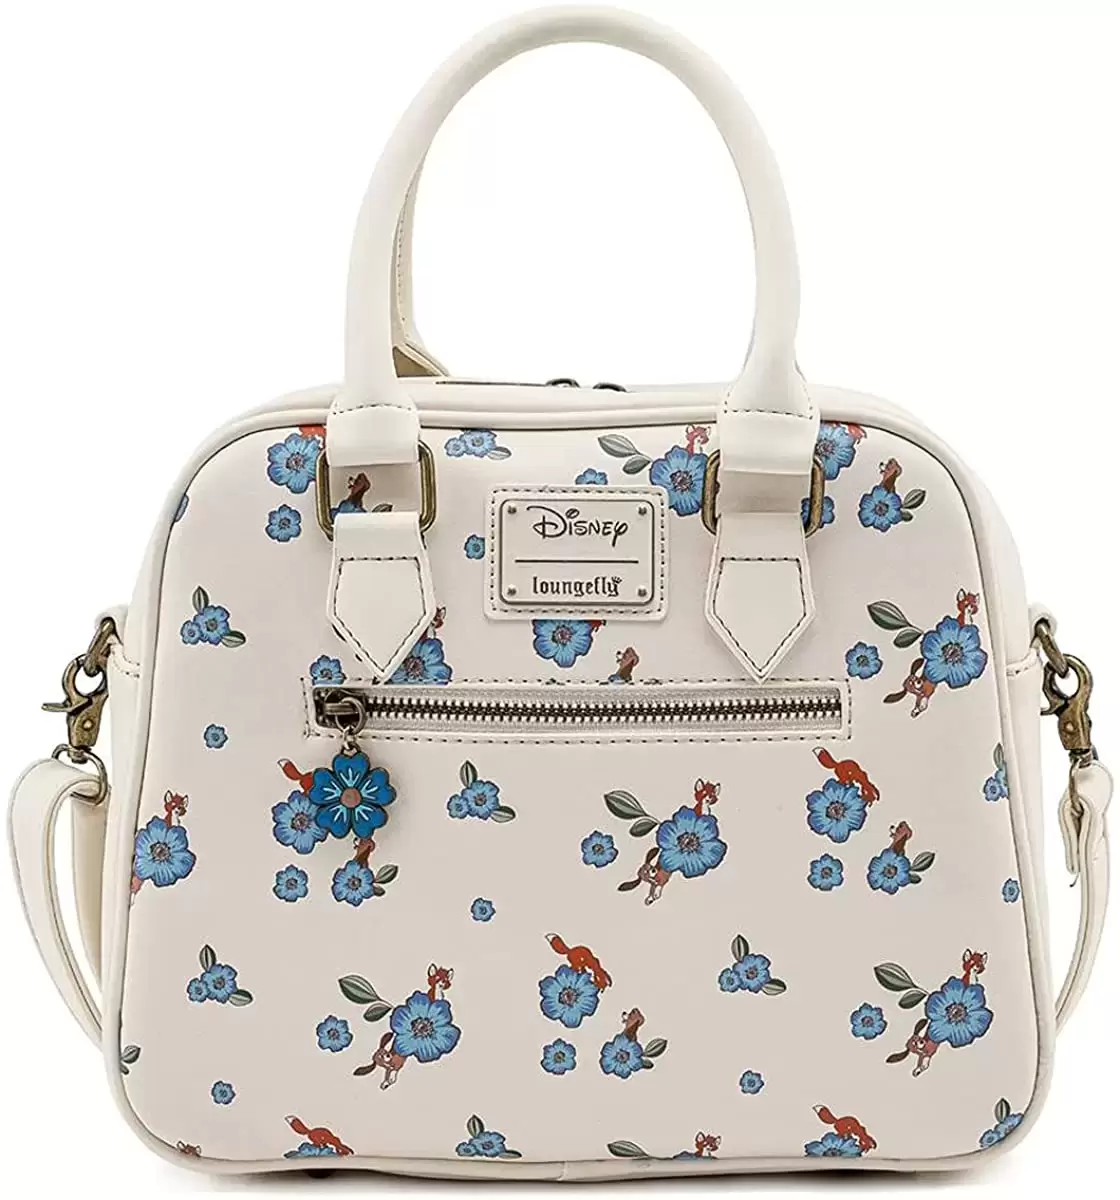 Loungefly - Sac Bandouliere Loungefly - Rox Et Rouky  -  Floral